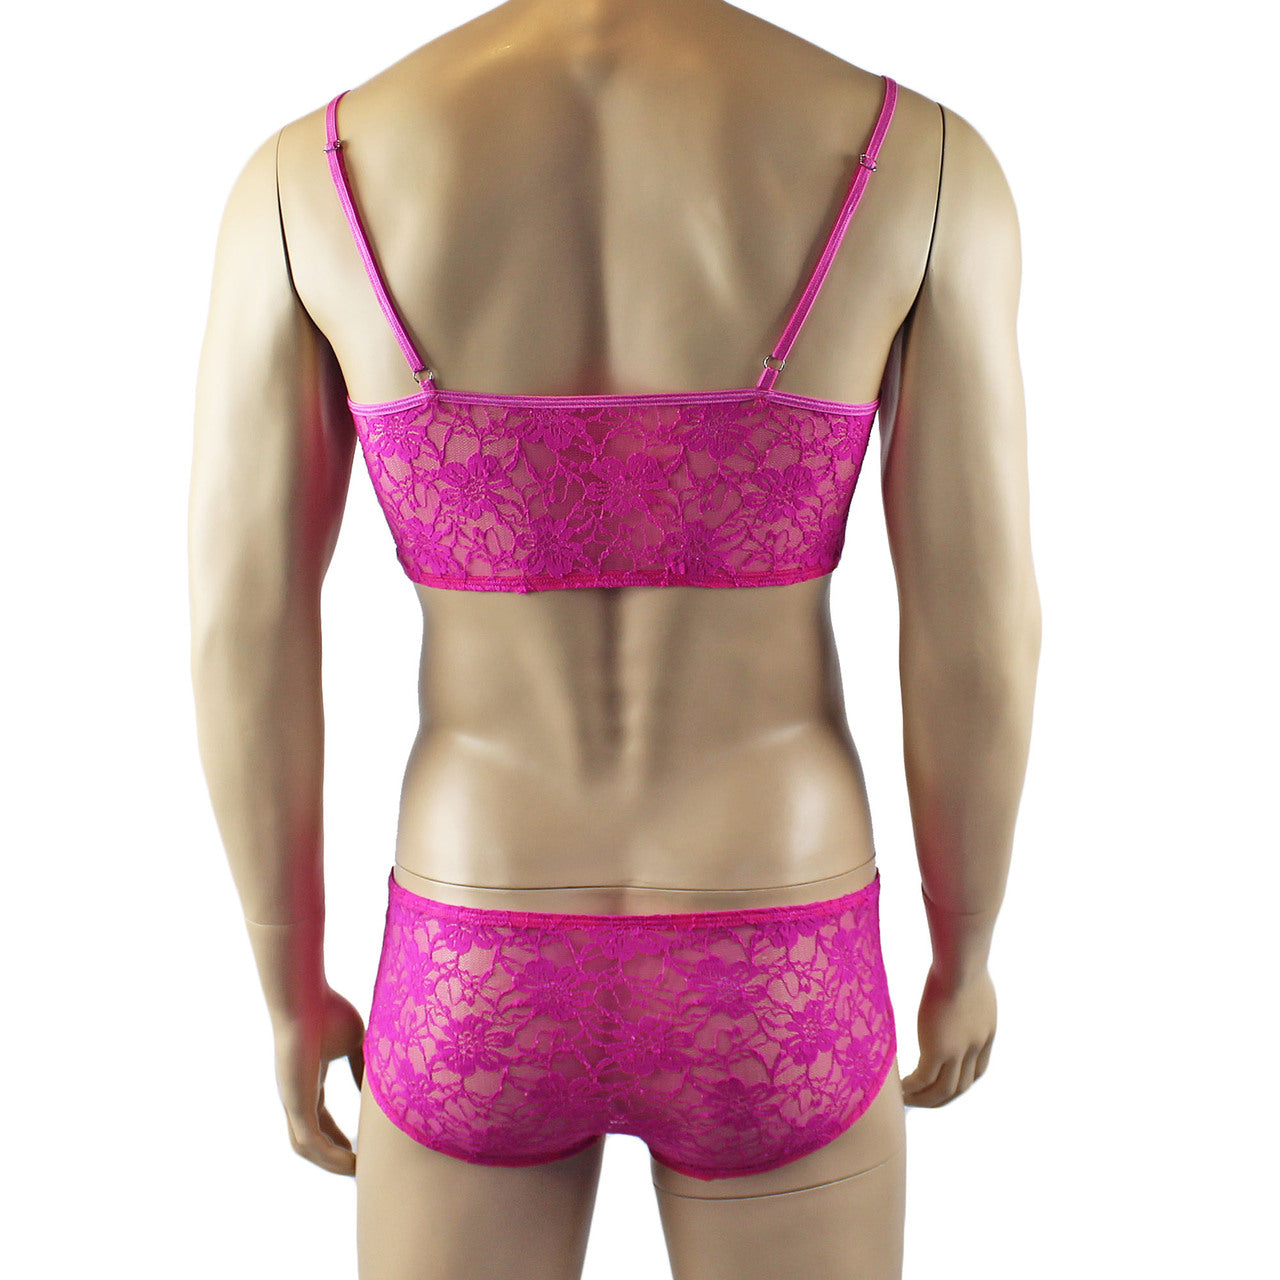 Mens Lace Crop Bra Top Camisole and Male Lingerie Panty Briefs (neon pink plus other colours)